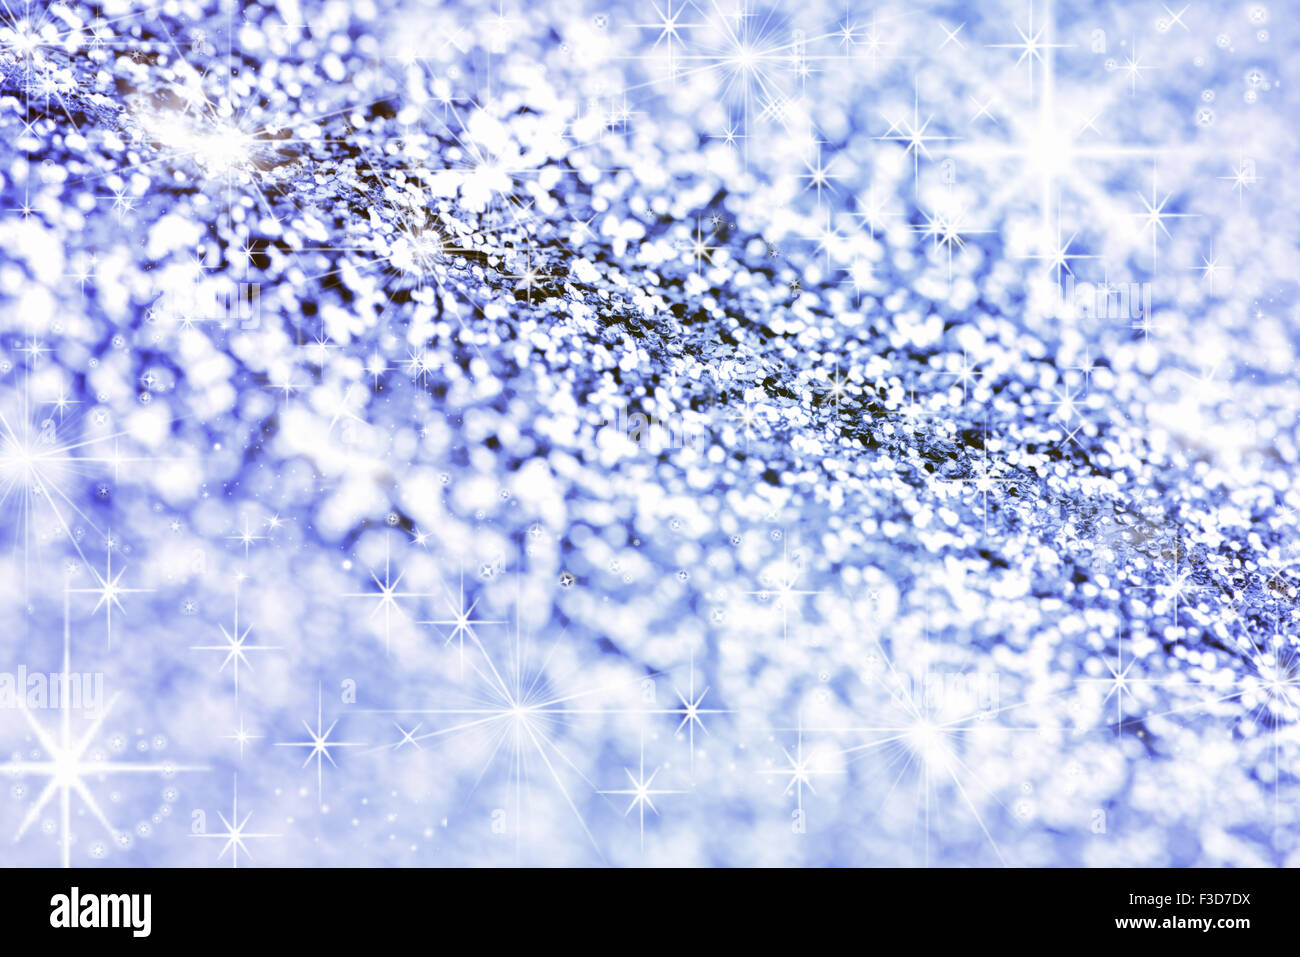 Abstract winter blue christmas background Stock Photo